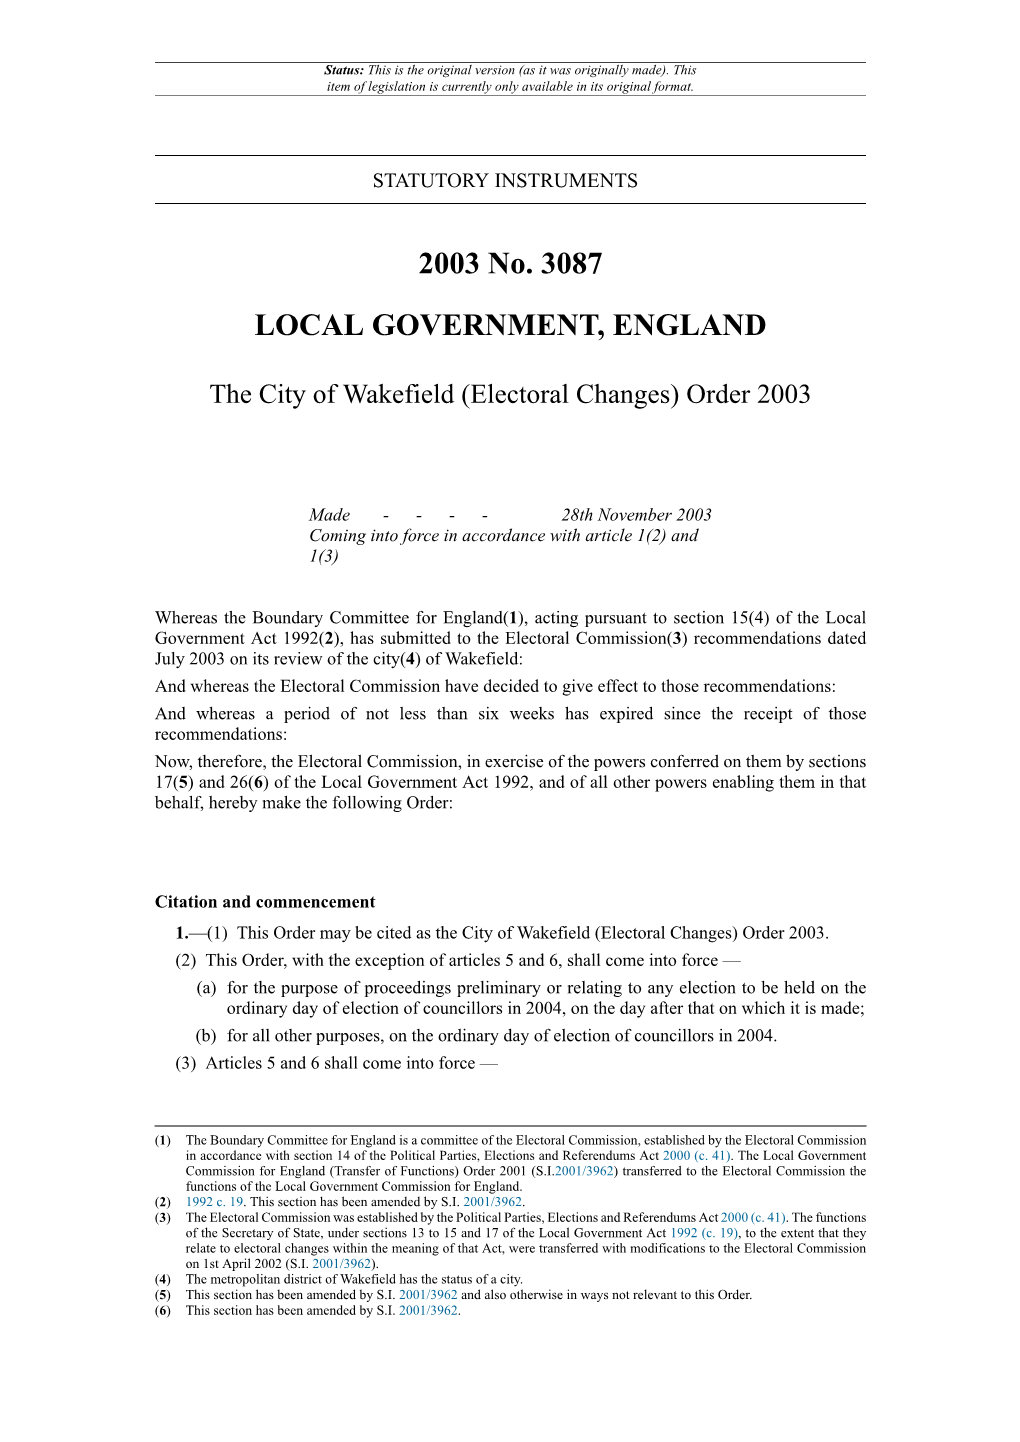 The City of Wakefield (Electoral Changes) Order 2003